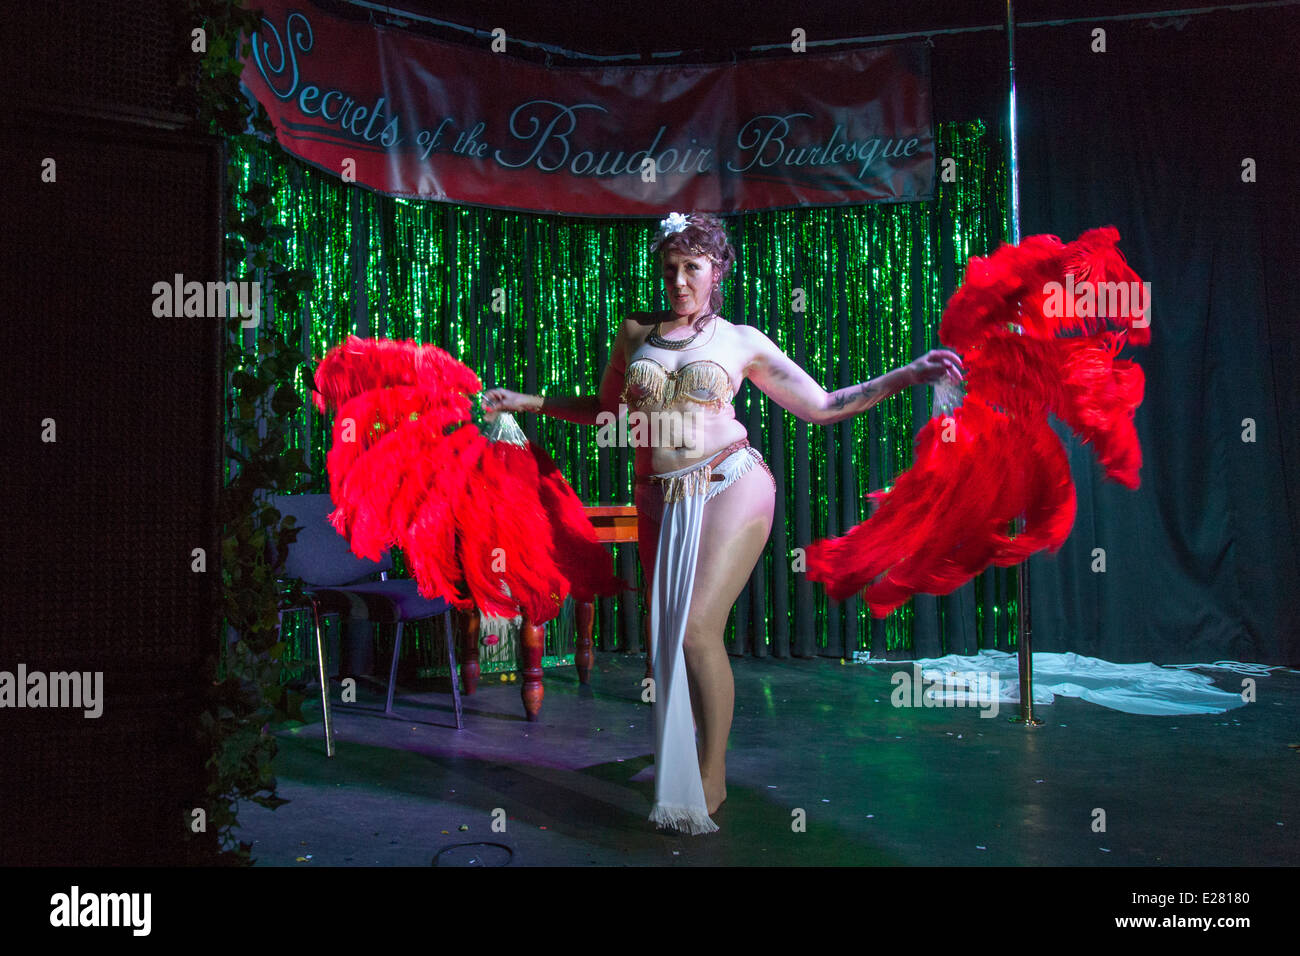 Performers at the Myths and Magic burlesque show, Secrets of the Boudoir  held in Sheffield.The performer is Carrie Couture Stock Photo - Alamy